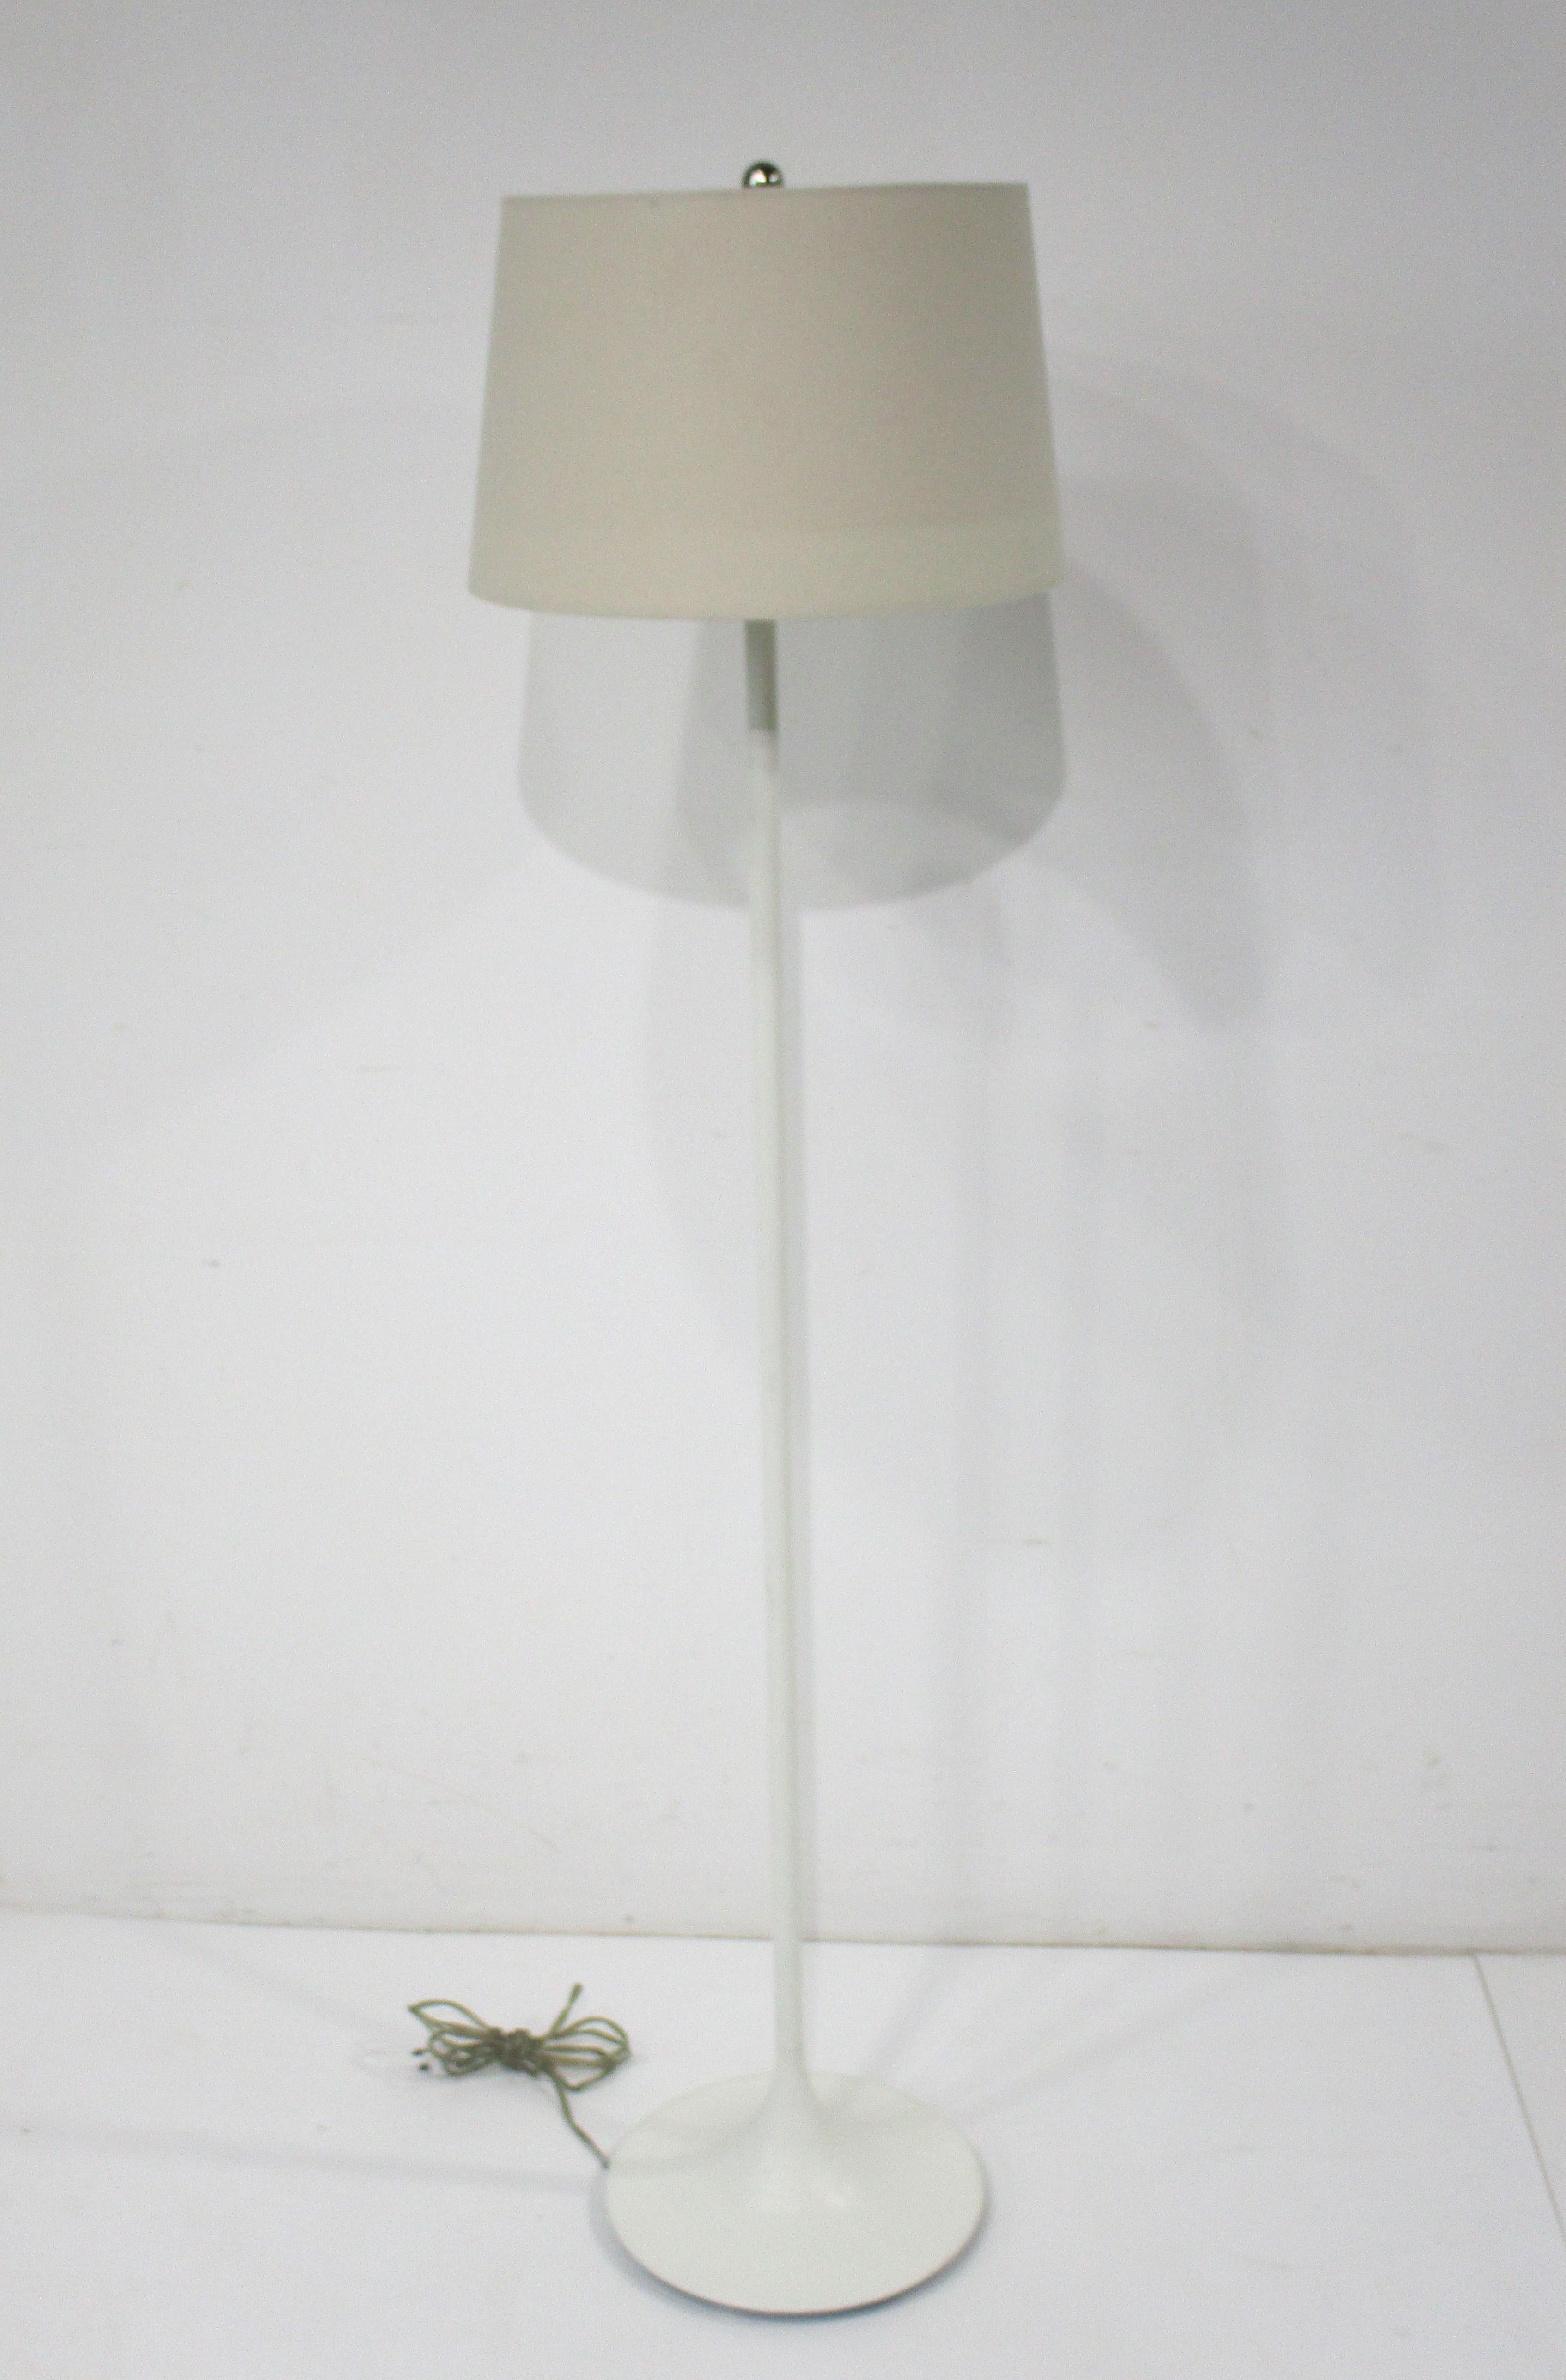 A white tulip styled floor lamp with linen shade in the manner of Eero Saarinen . This hard to find item would go perfectly with your Mid Century Knoll furnishings , nice clean lines and a simple modern look that's fresh today as it was 50 years ago